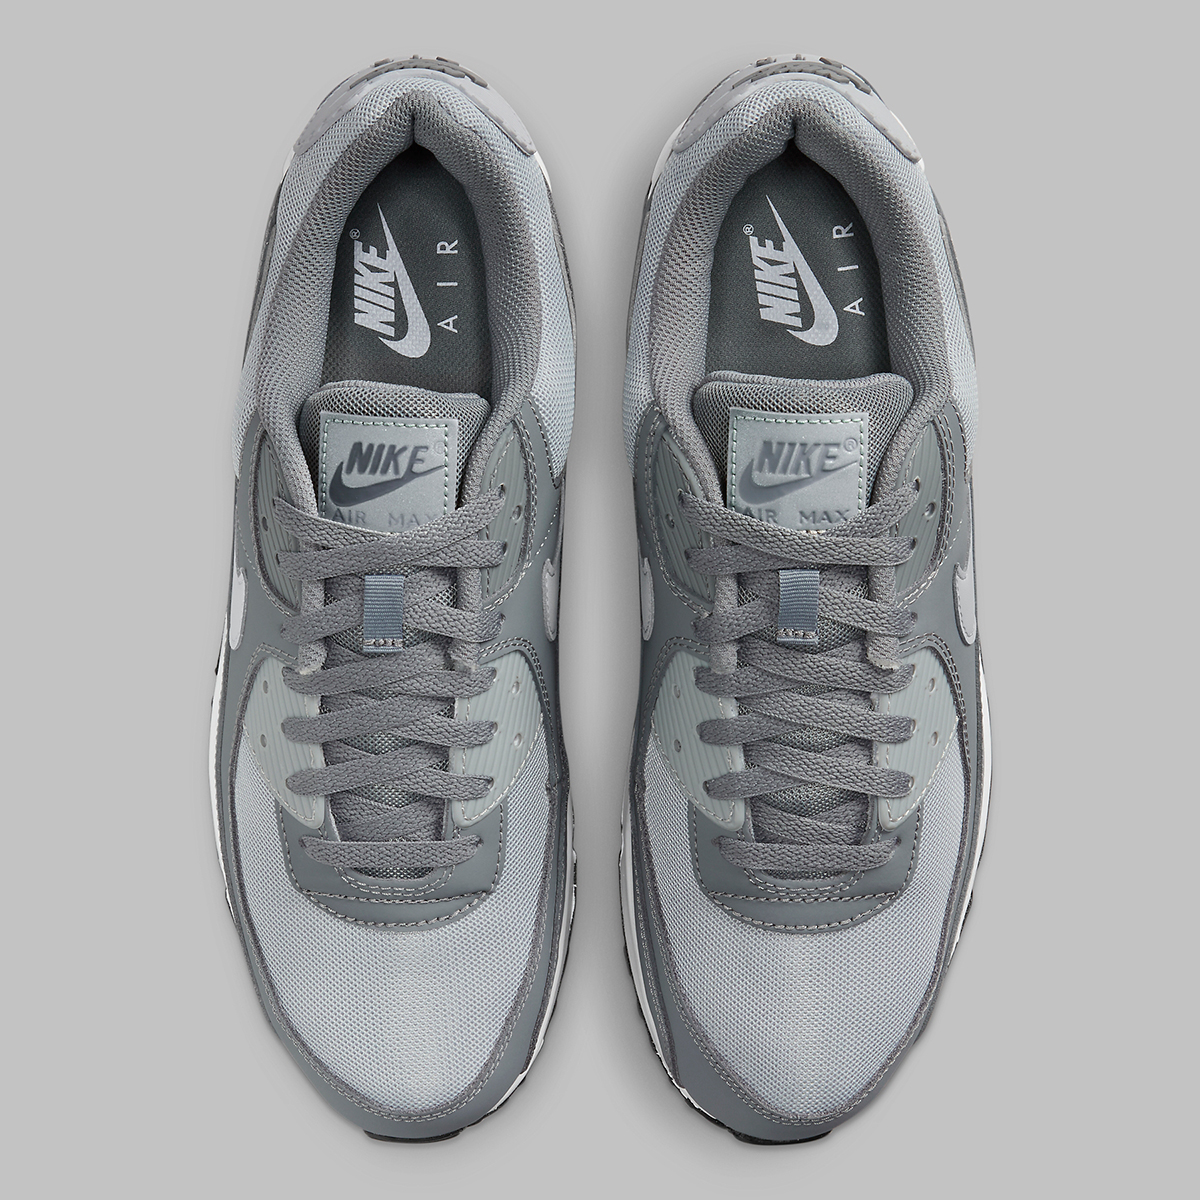 Nike Nike Air One Gets Gummed-Out Reflective Tongue Grey Hm0625 002 8